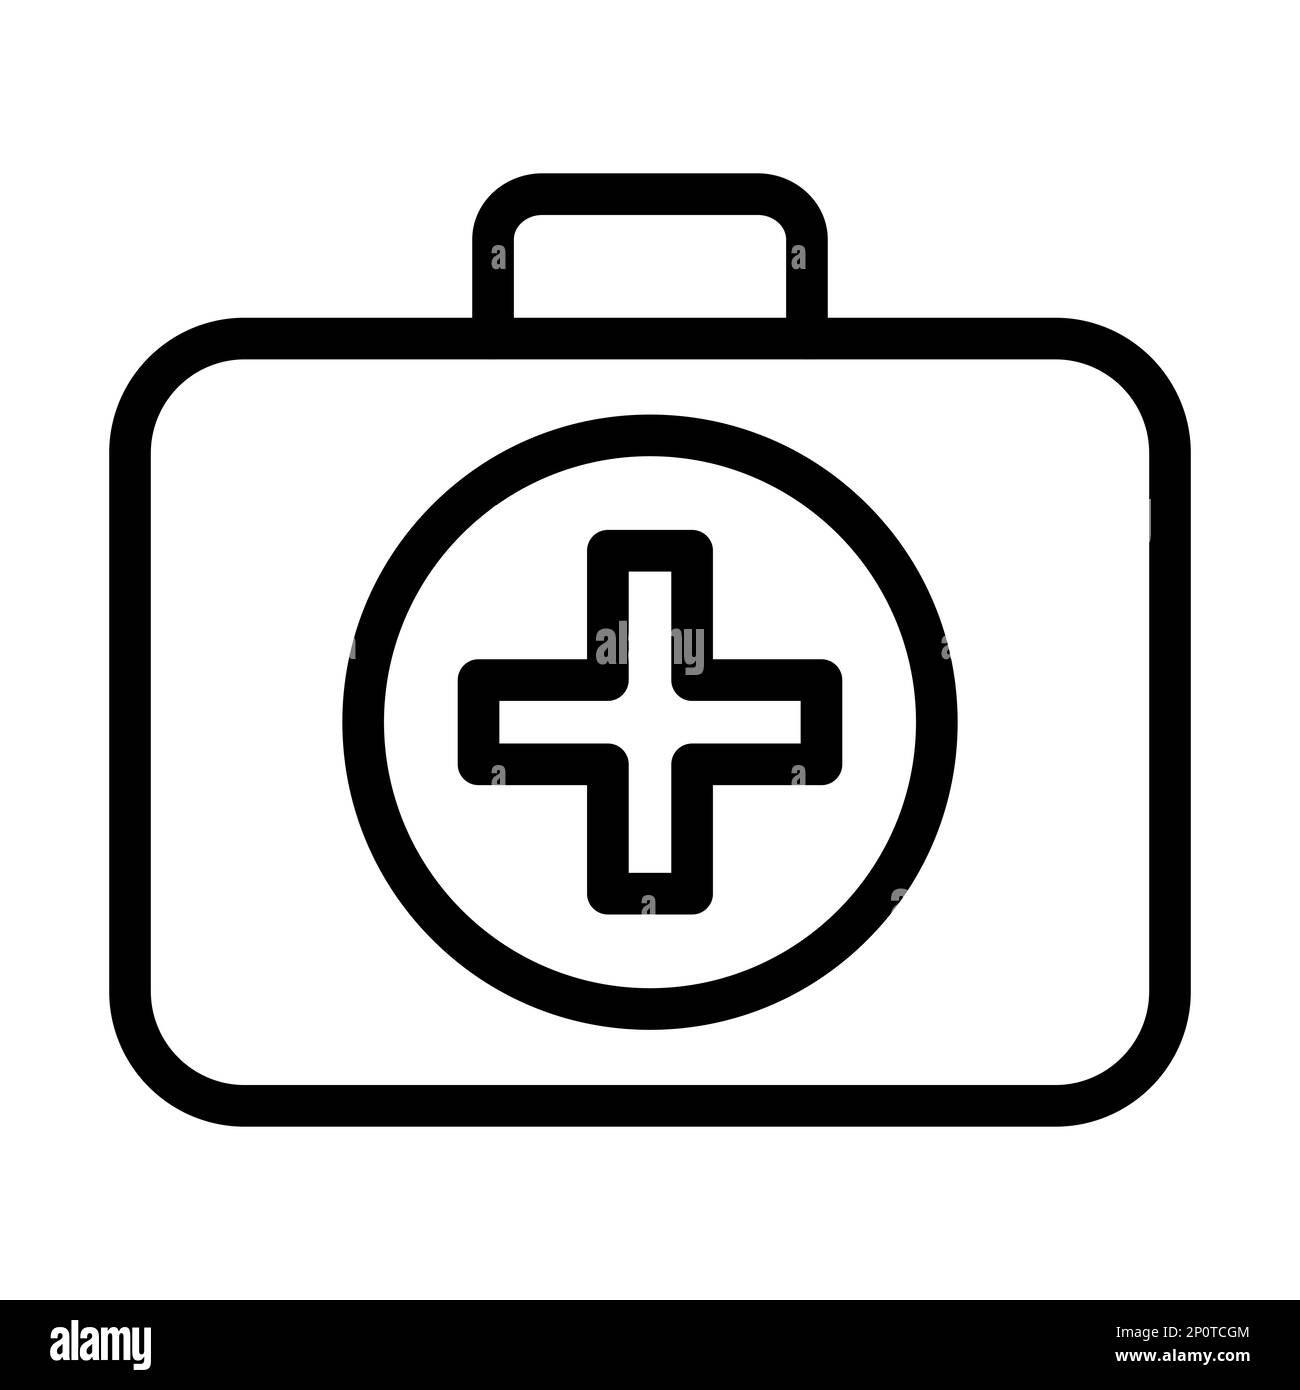 First Aid Kit Vector Thick Line Icon For Personal And Commercial Use. Stock Photo